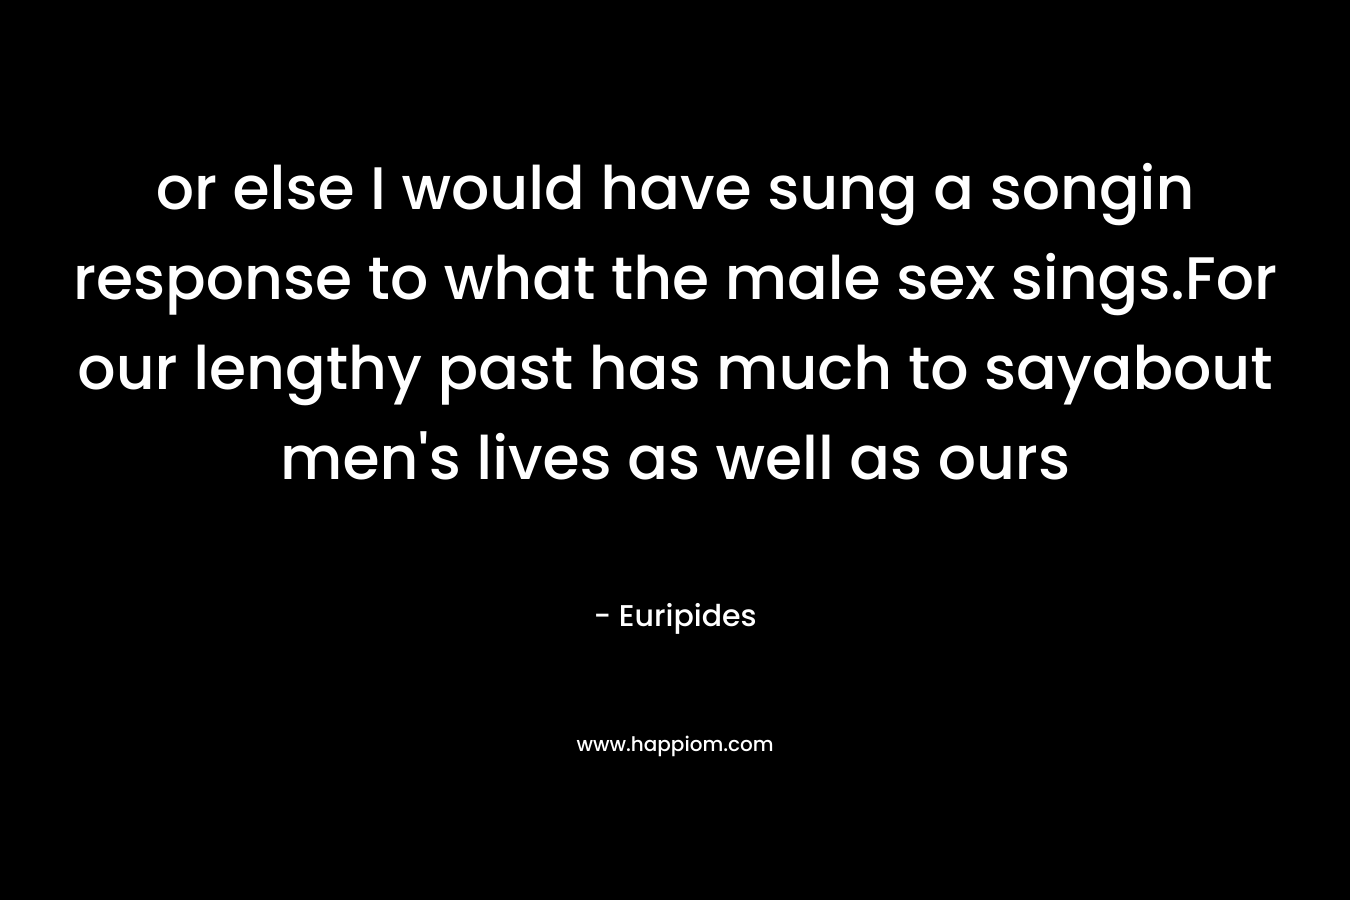 or else I would have sung a songin response to what the male sex sings.For our lengthy past has much to sayabout men's lives as well as ours